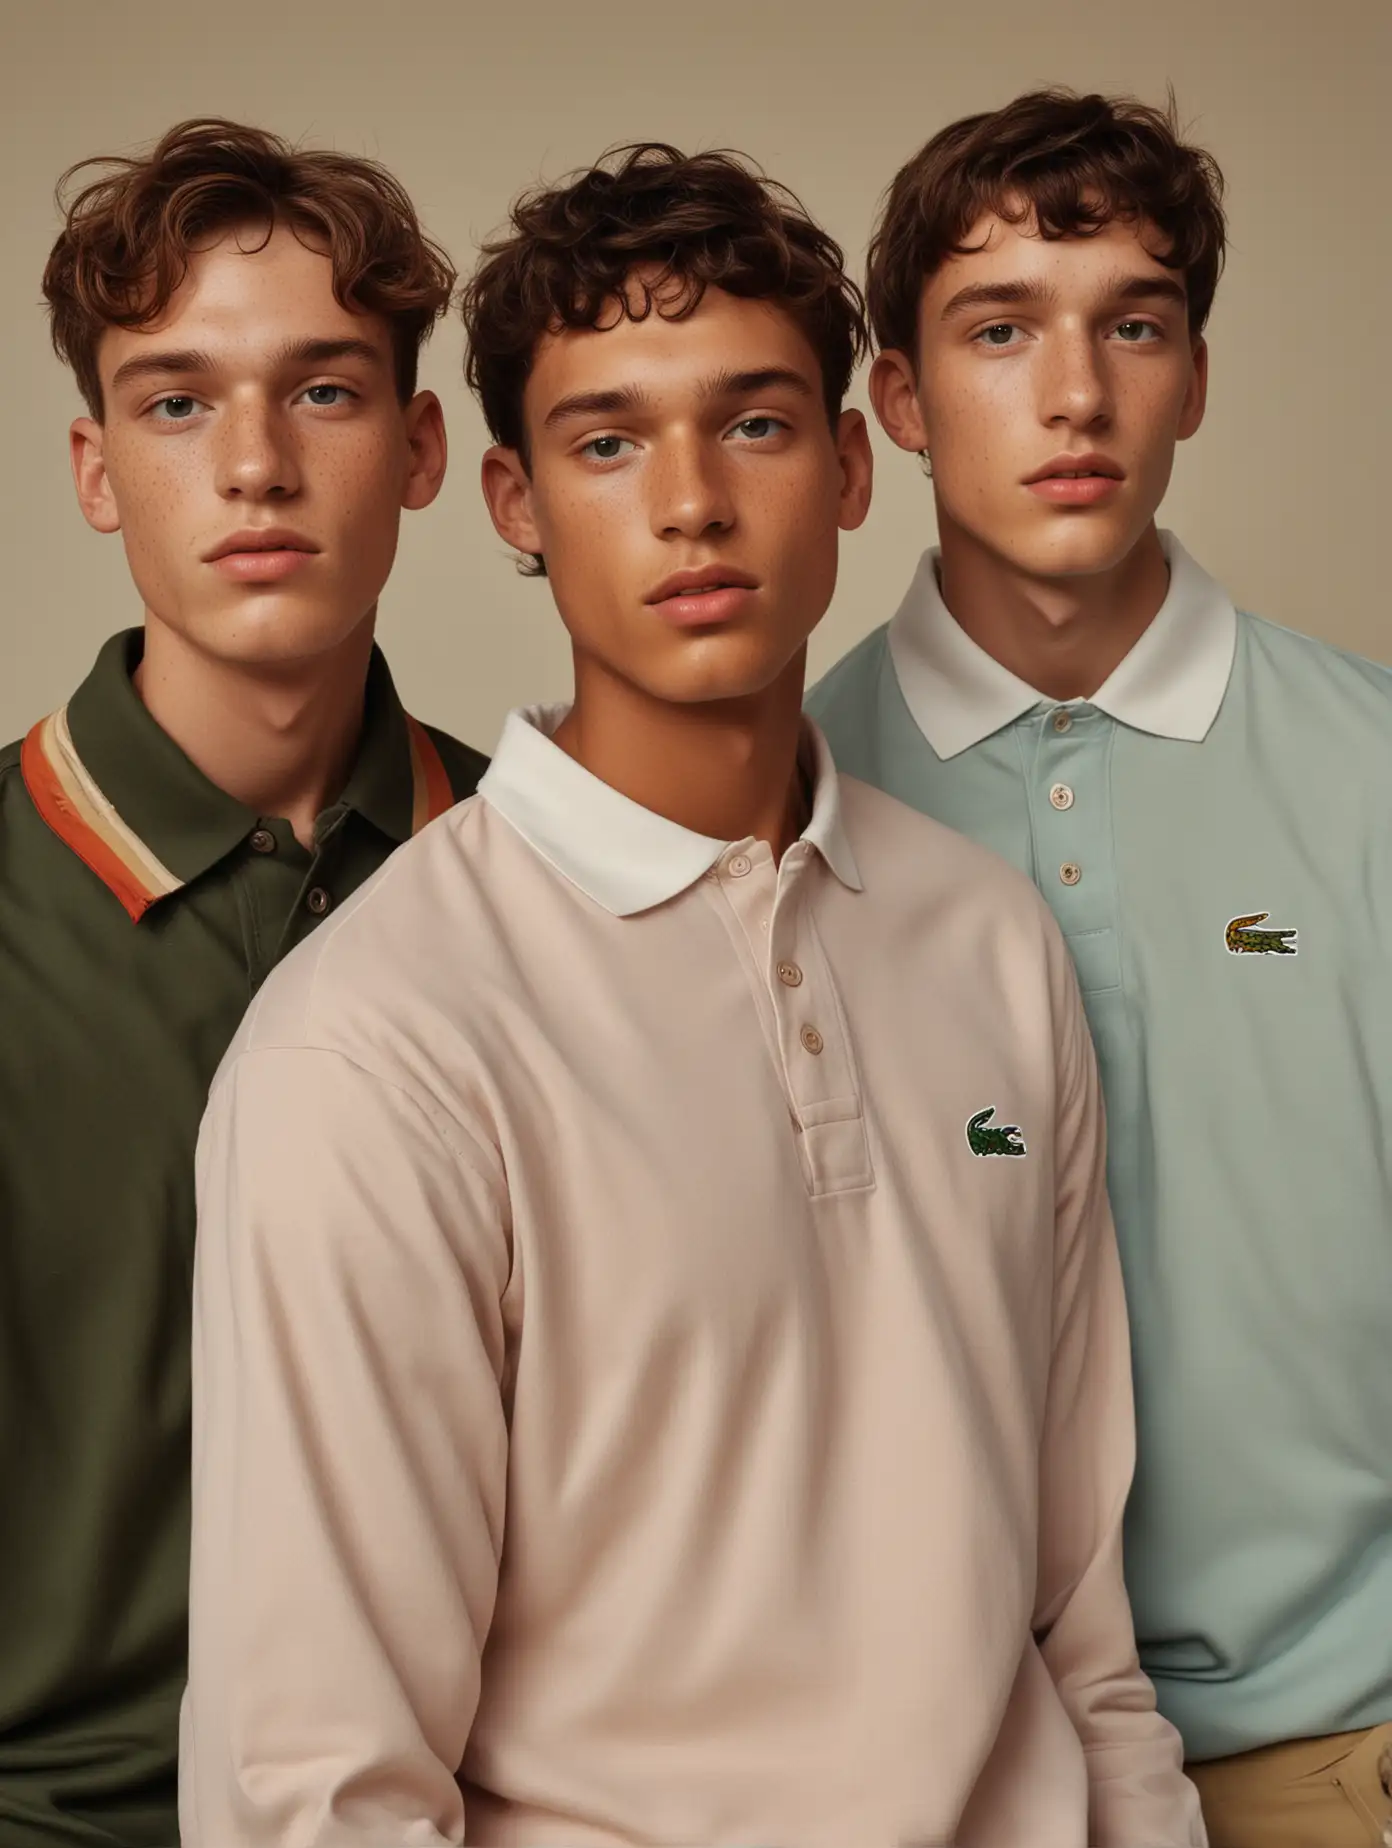 male models with freckels and semi dark skin is posing like in an old renaissance painting, models are wearing full lacoste outfits, colorful poloshirt, models are floating